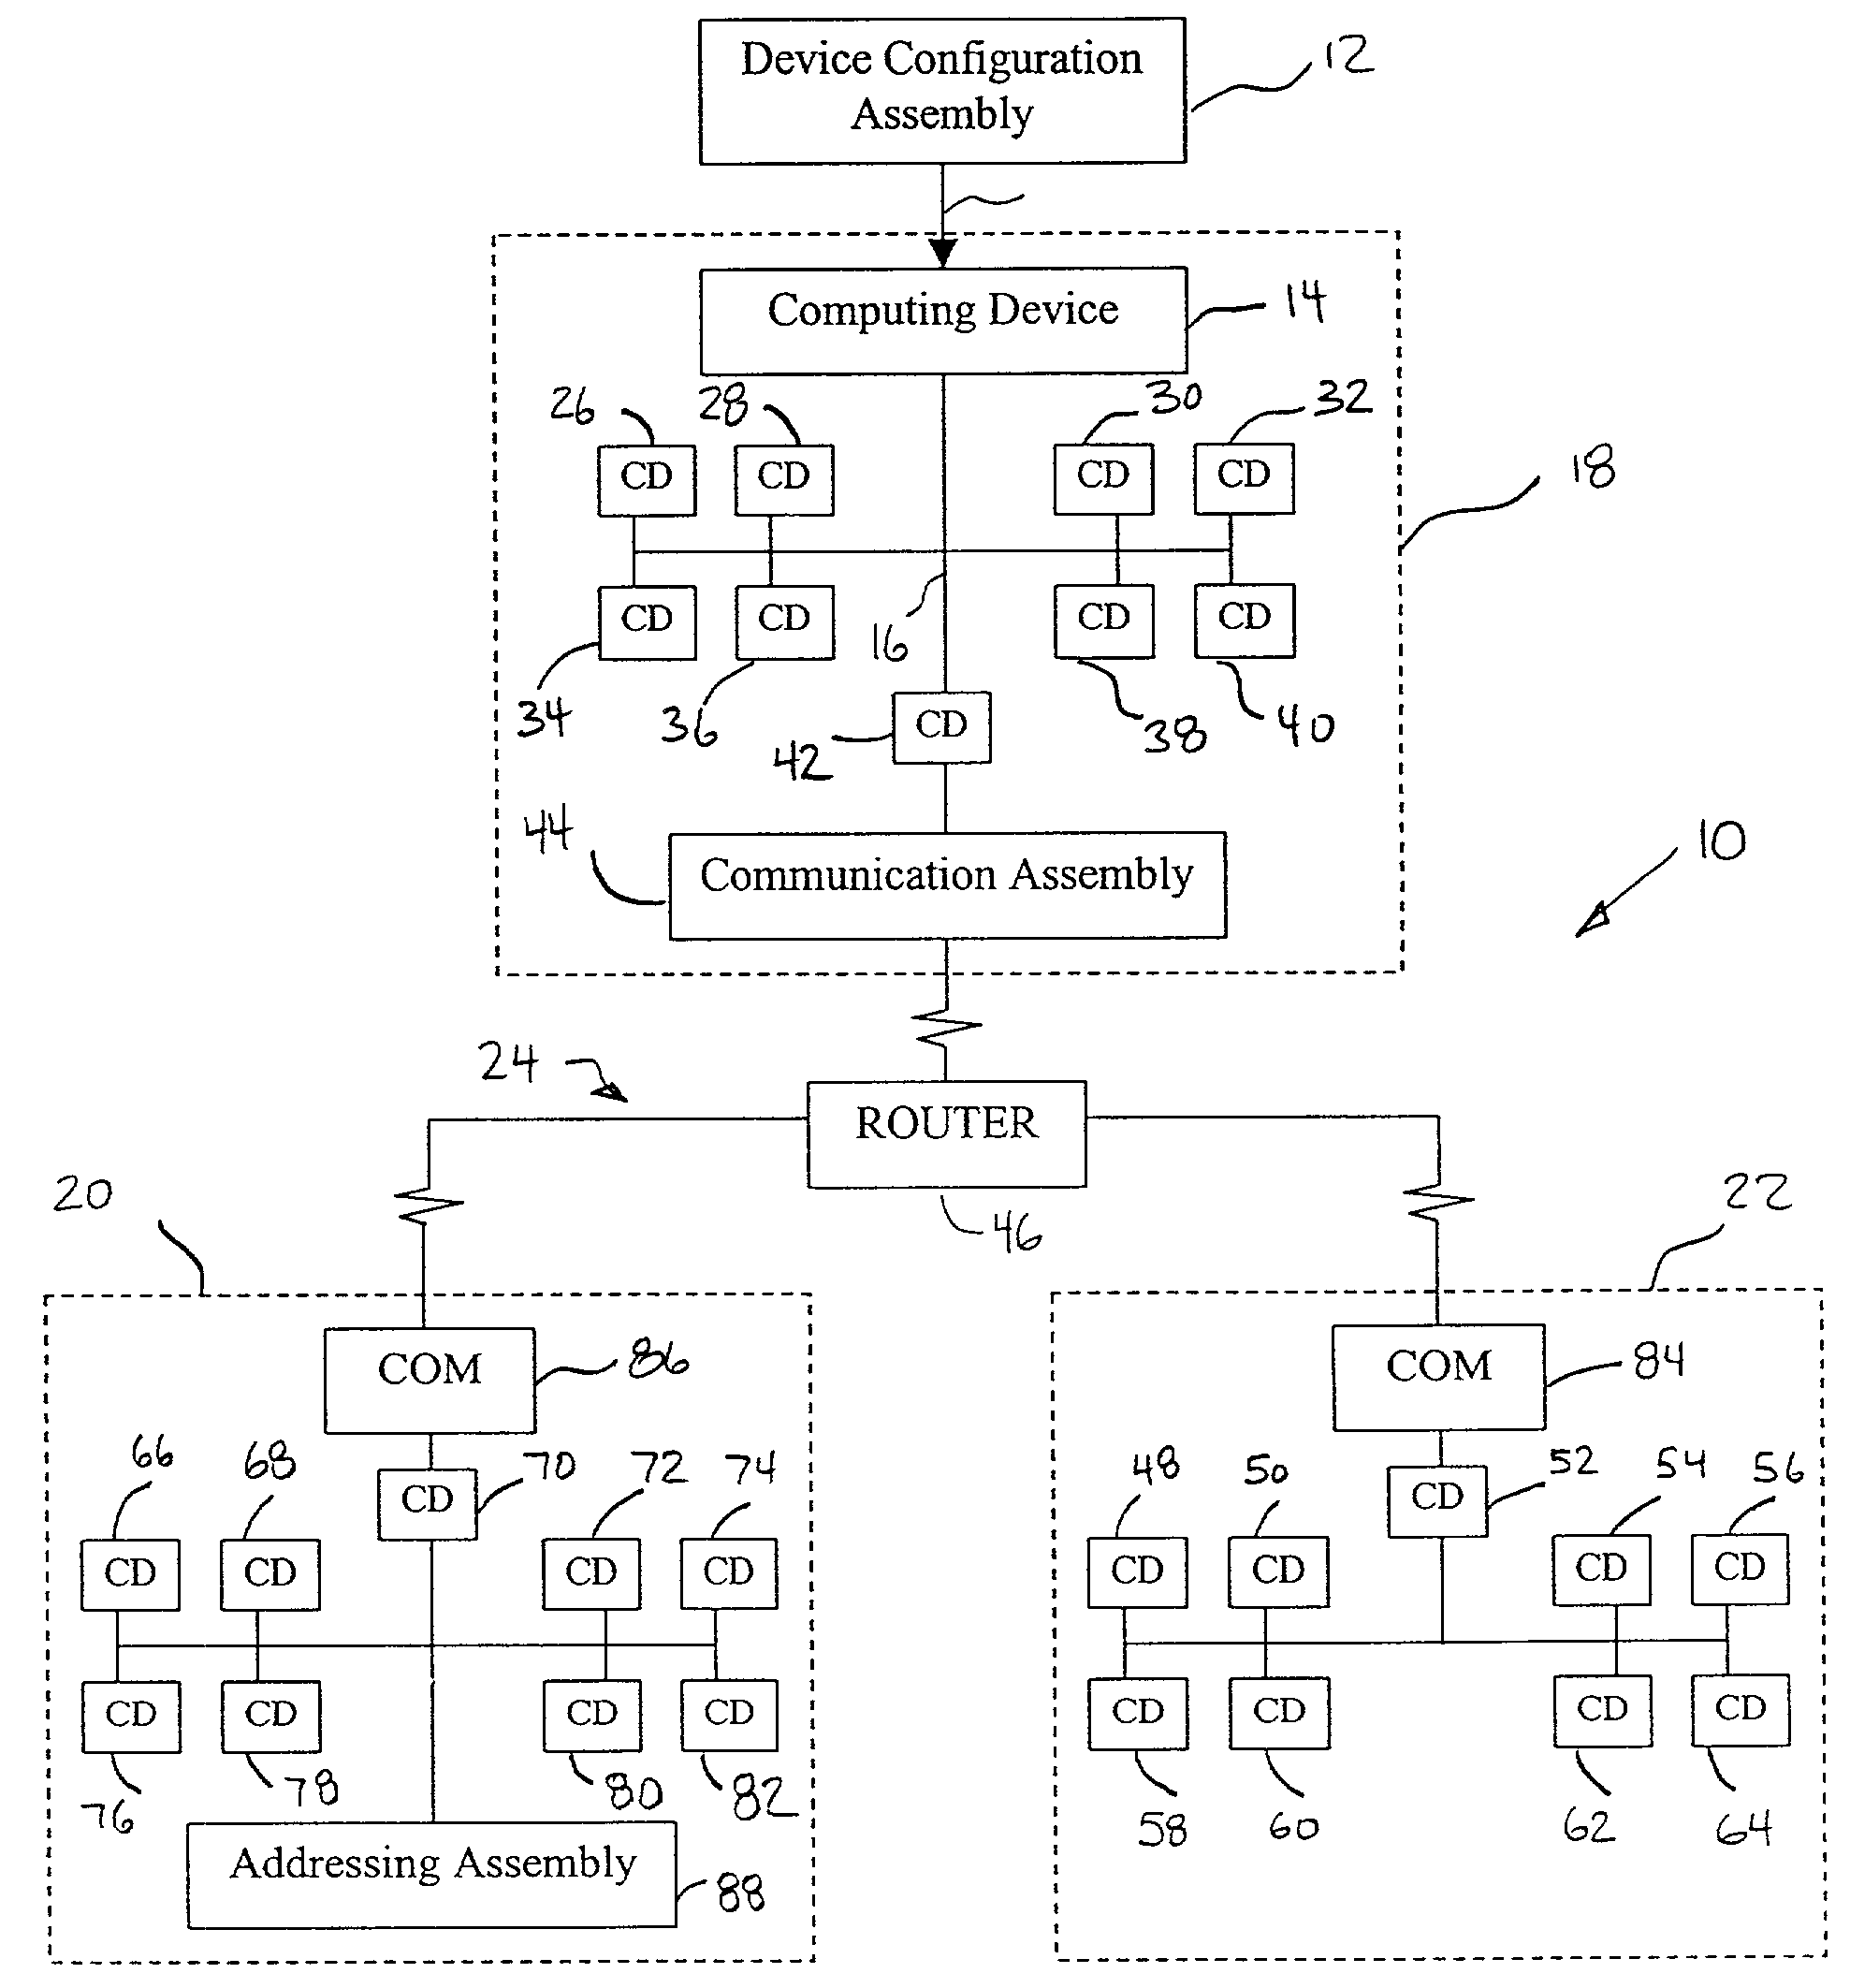 System and method for remote discovery and configuration of a network device